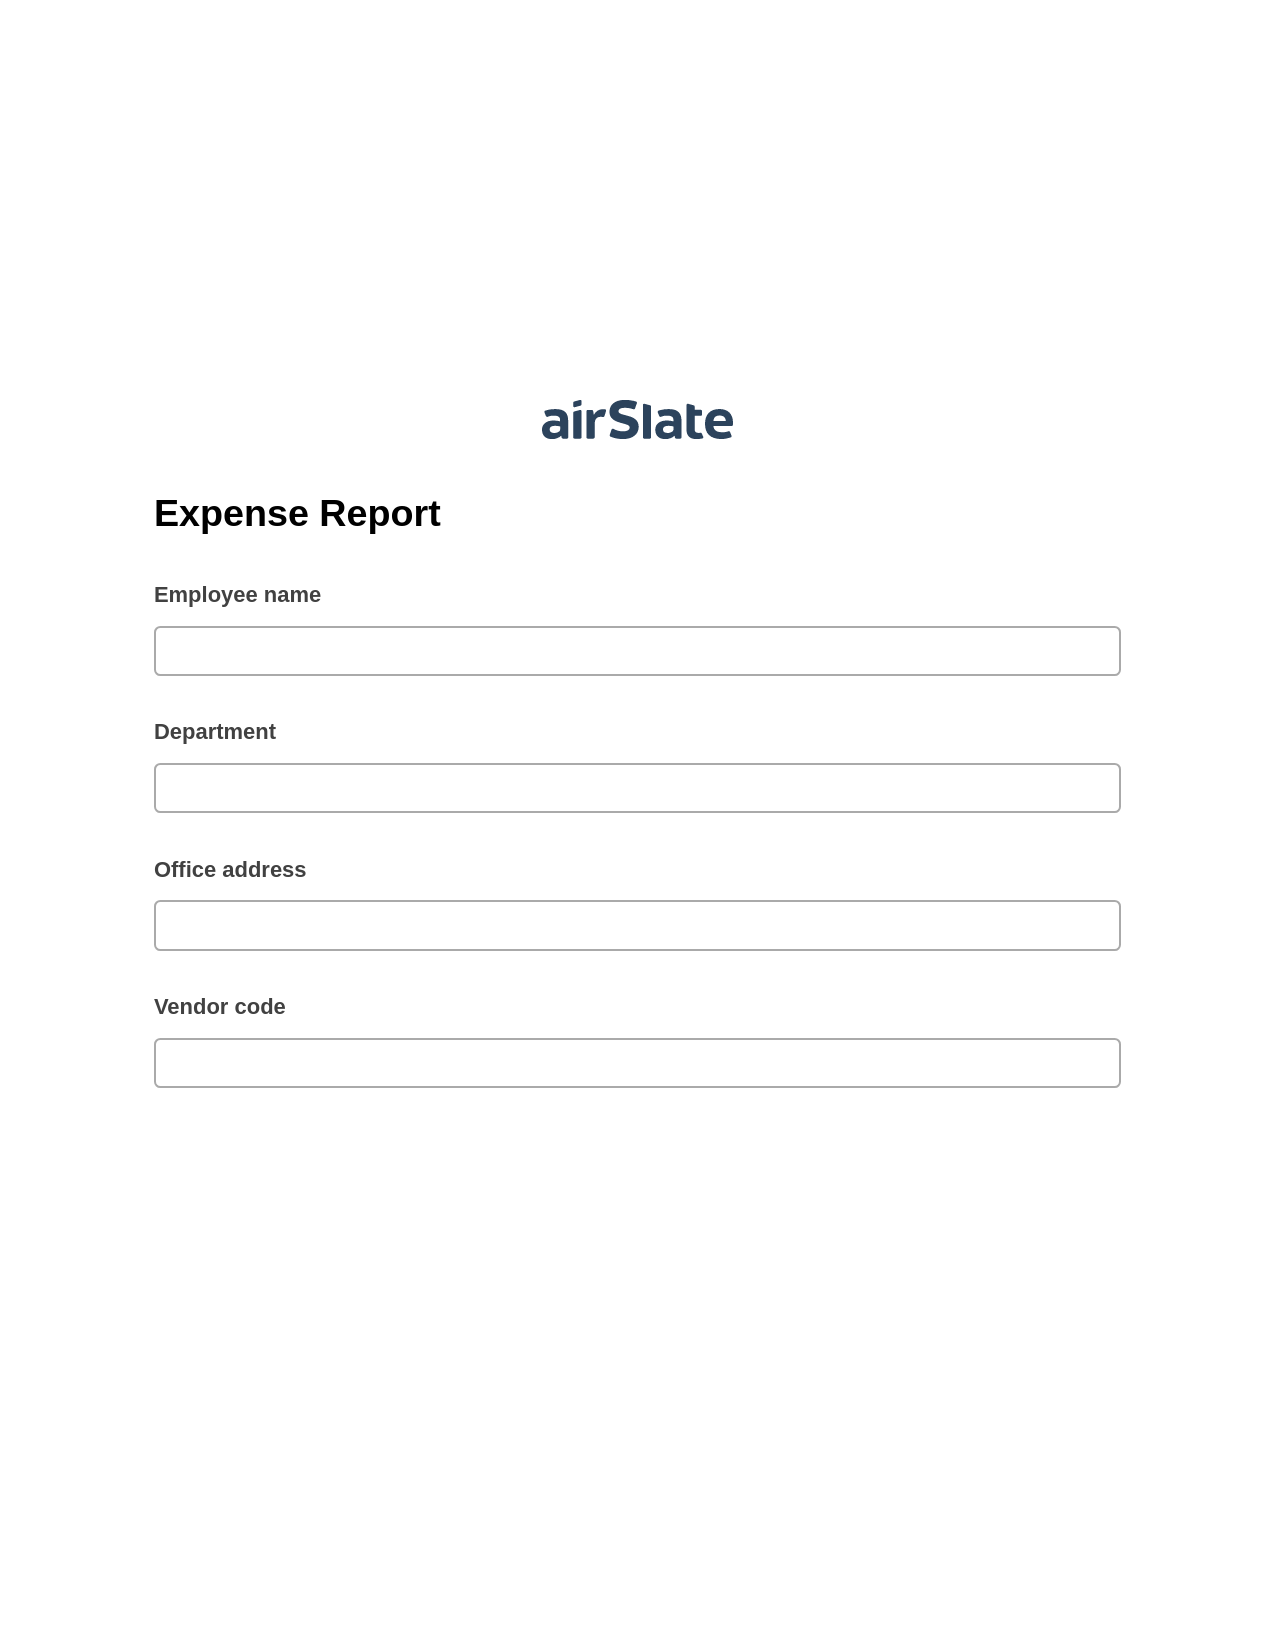 Multirole Expense Report Pre-fill Slate from MS Dynamics 365 Records Bot, Create NetSuite Records Bot, Box Bot